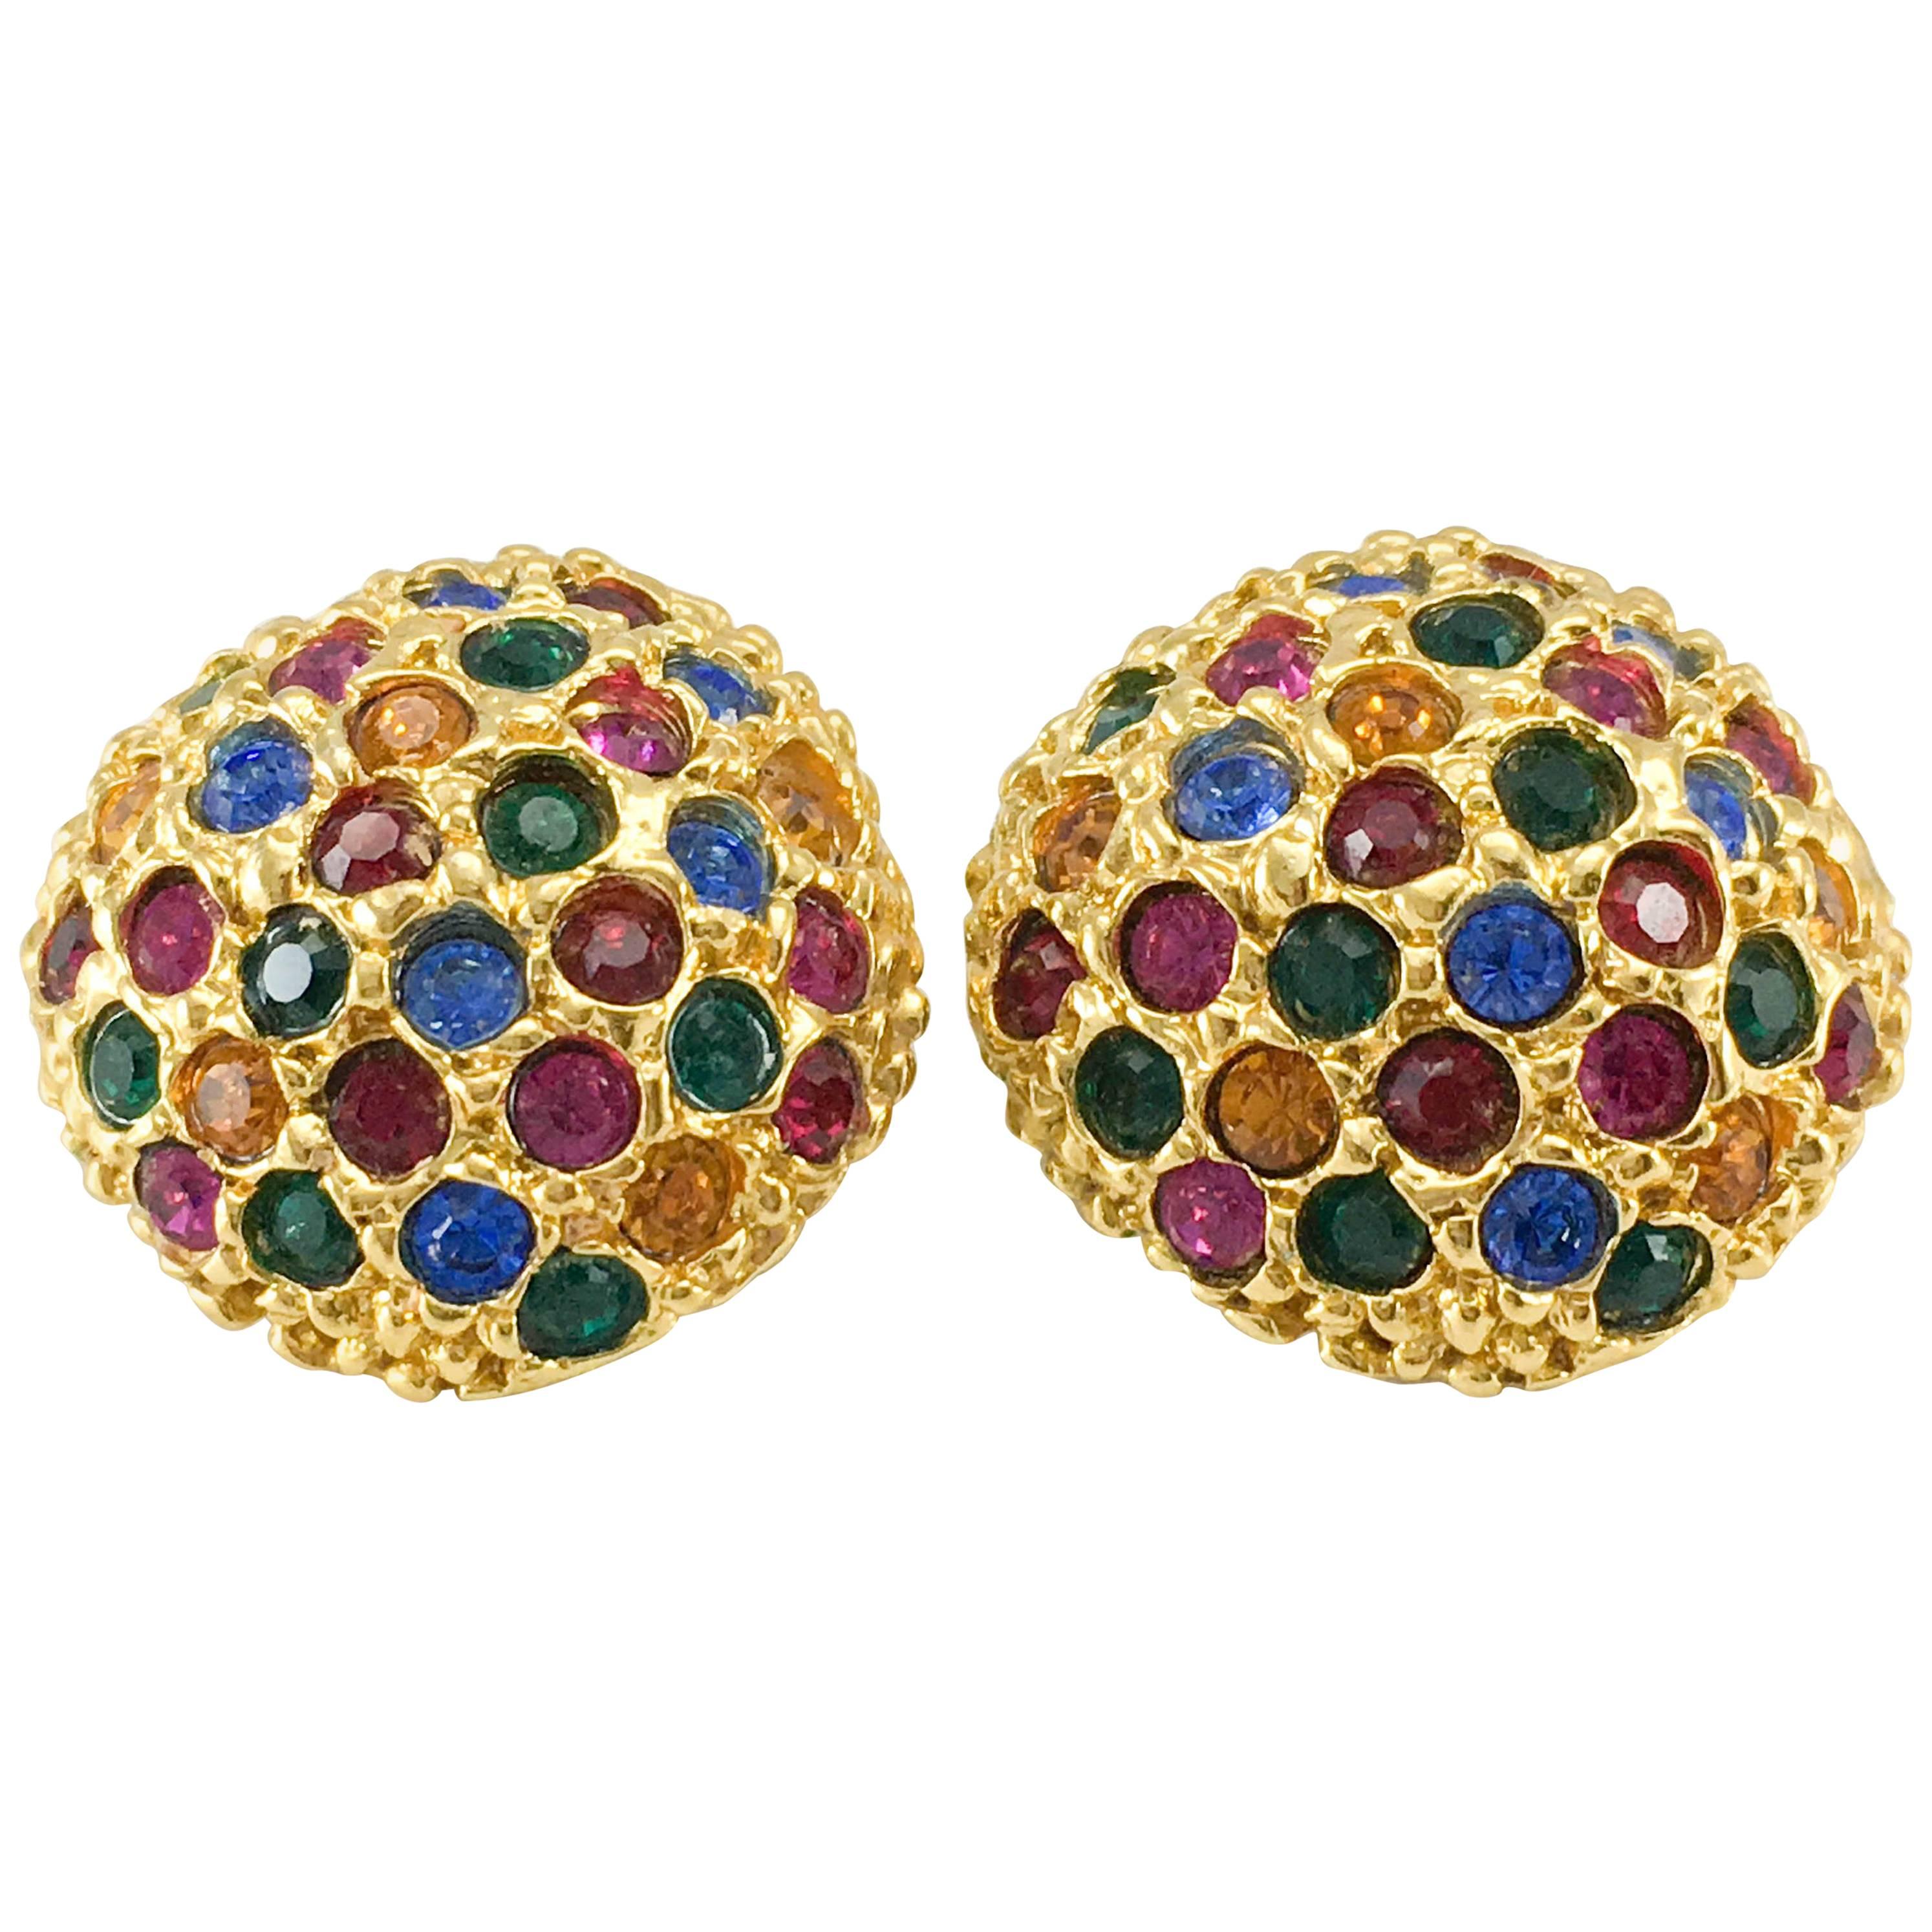 1980s Yves Saint Laurent Colourful Crystal Embellished Gold-Plated Earrings